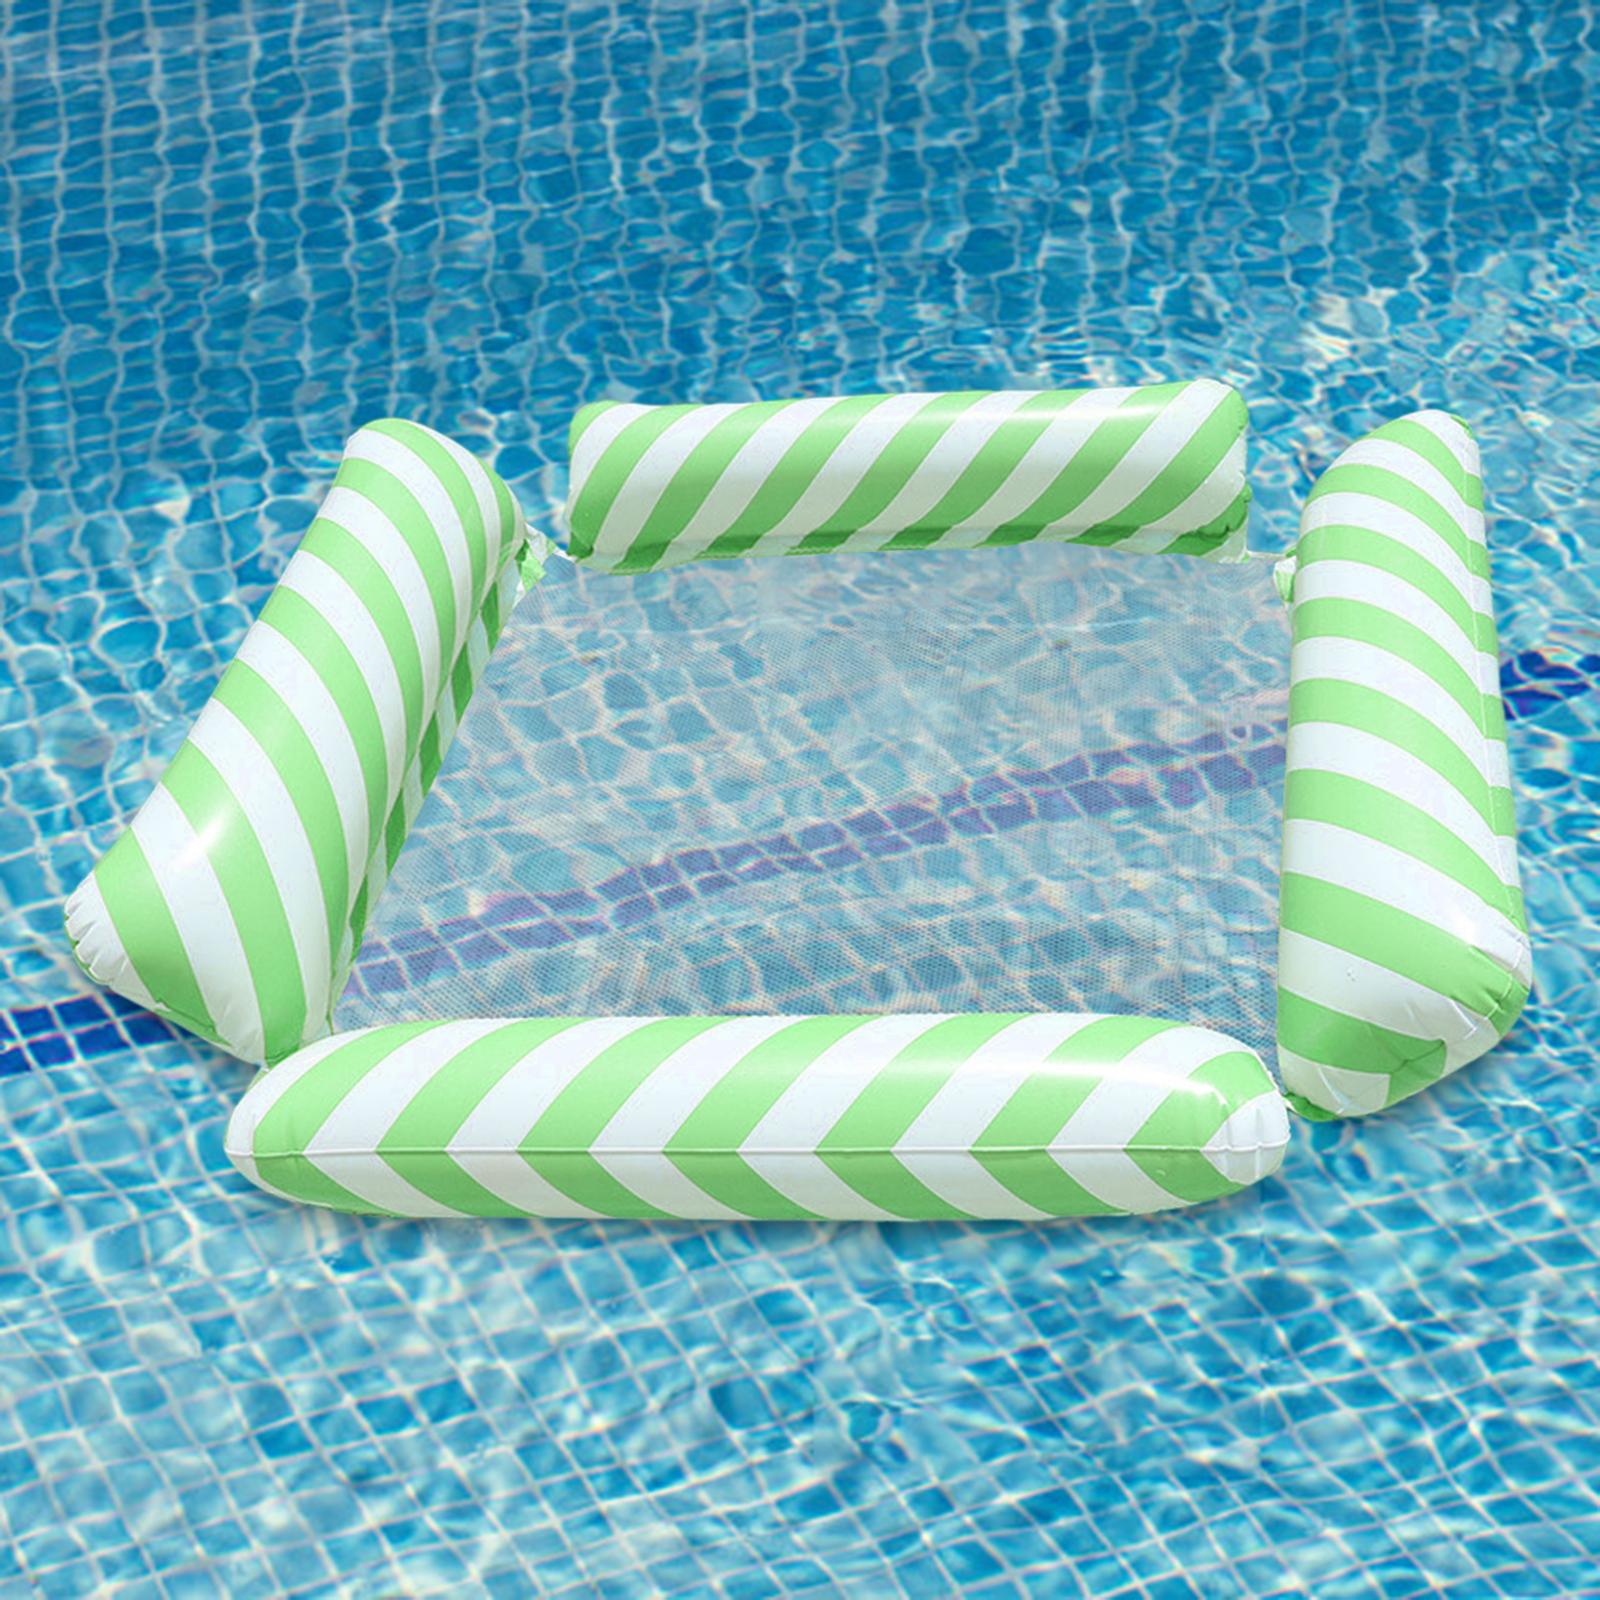 Inflatable Pool Float Hammock Bed for Adults Kids Durable Drifting Water Toy Green